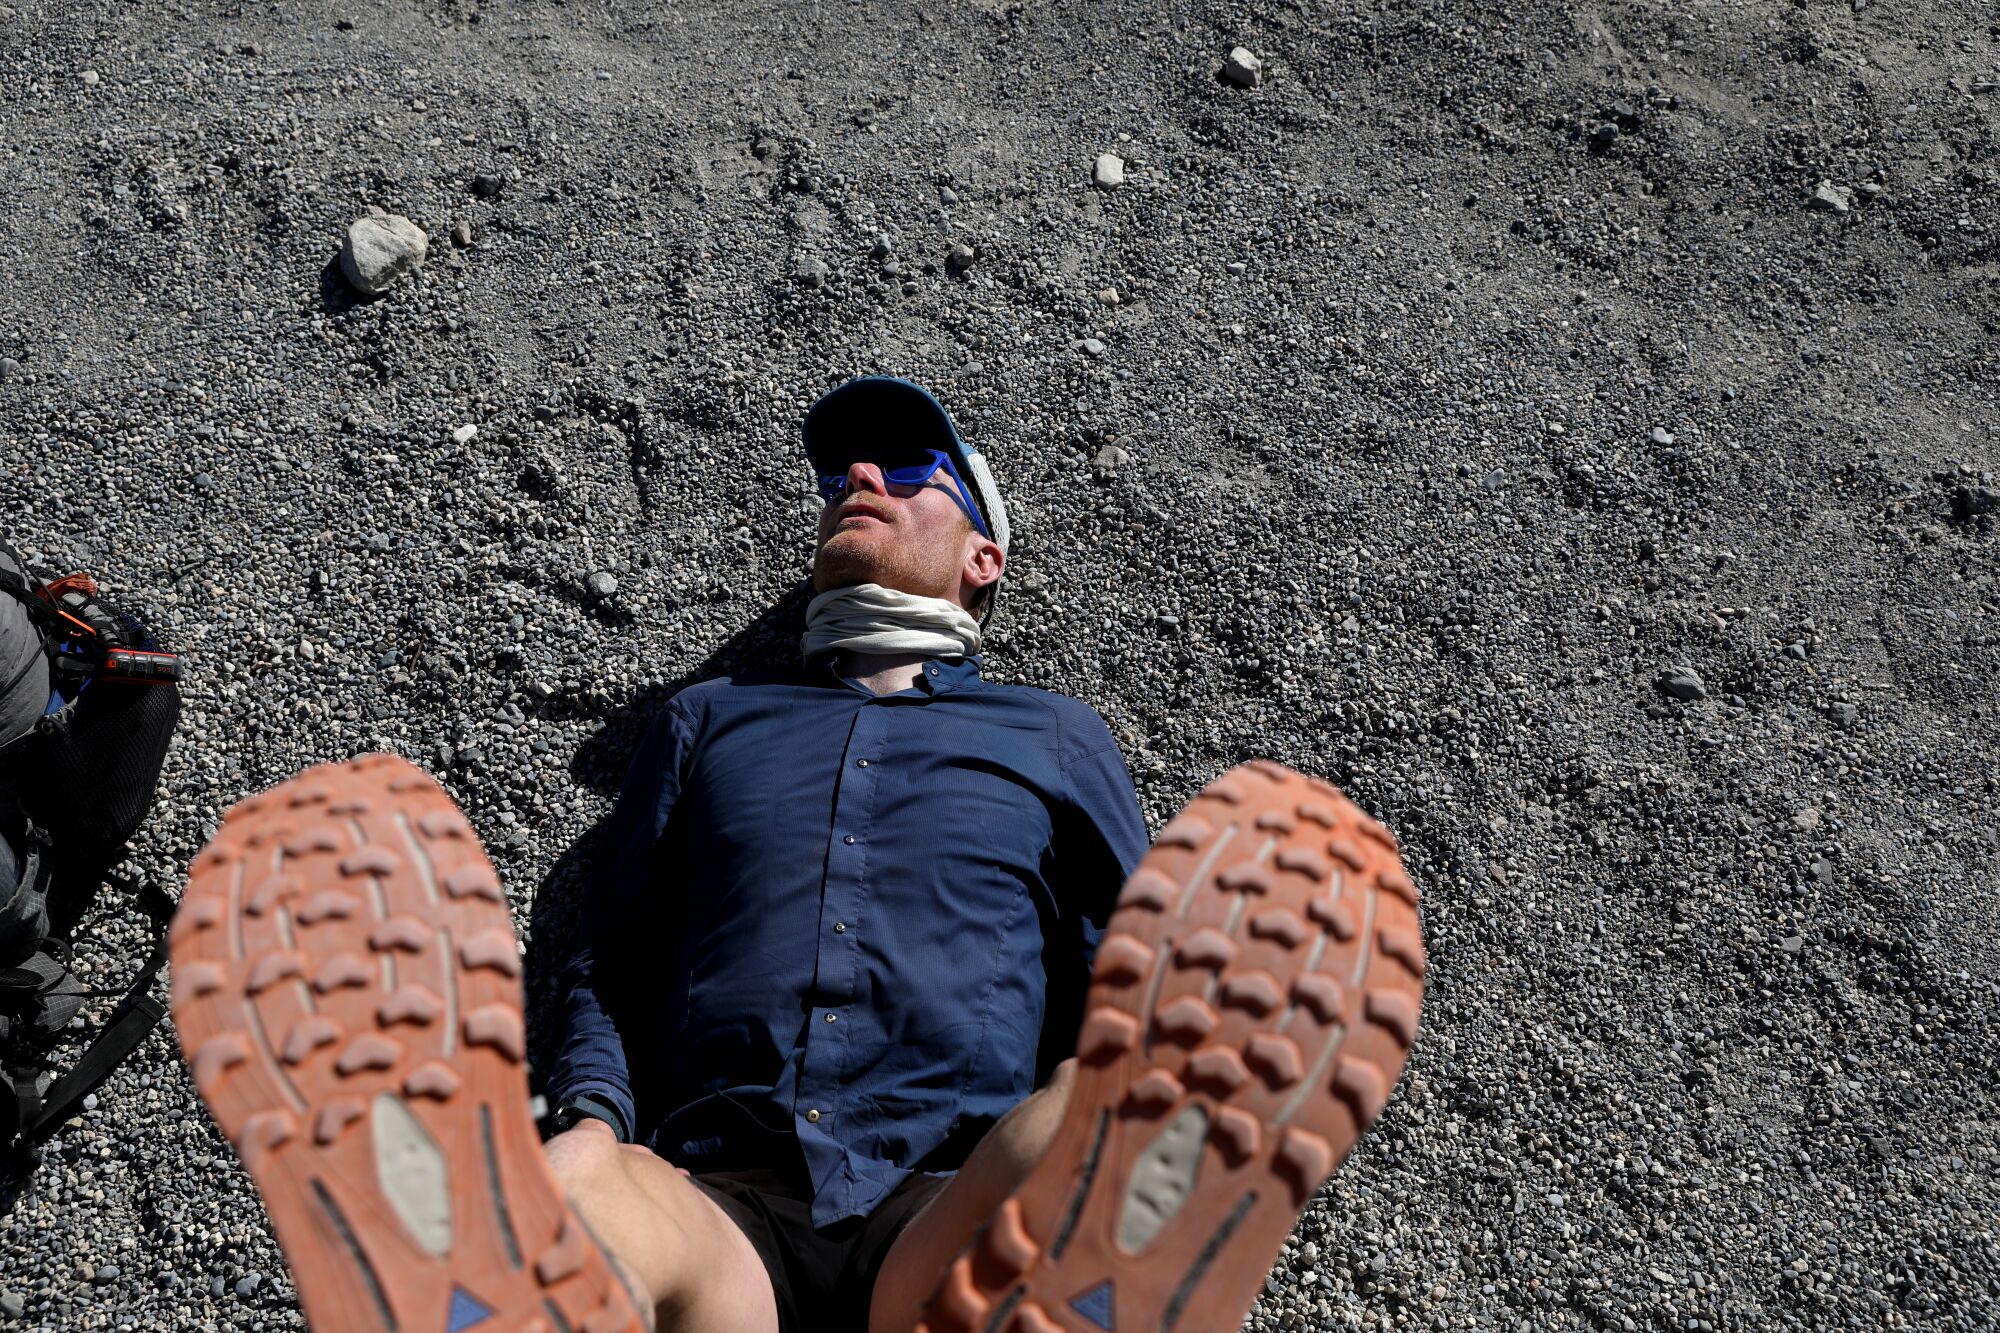 Feb. 18, 2022: Cameron Hummels, an astrophysicist, rests at the Harry Wade Exit Route in Death Valley. 